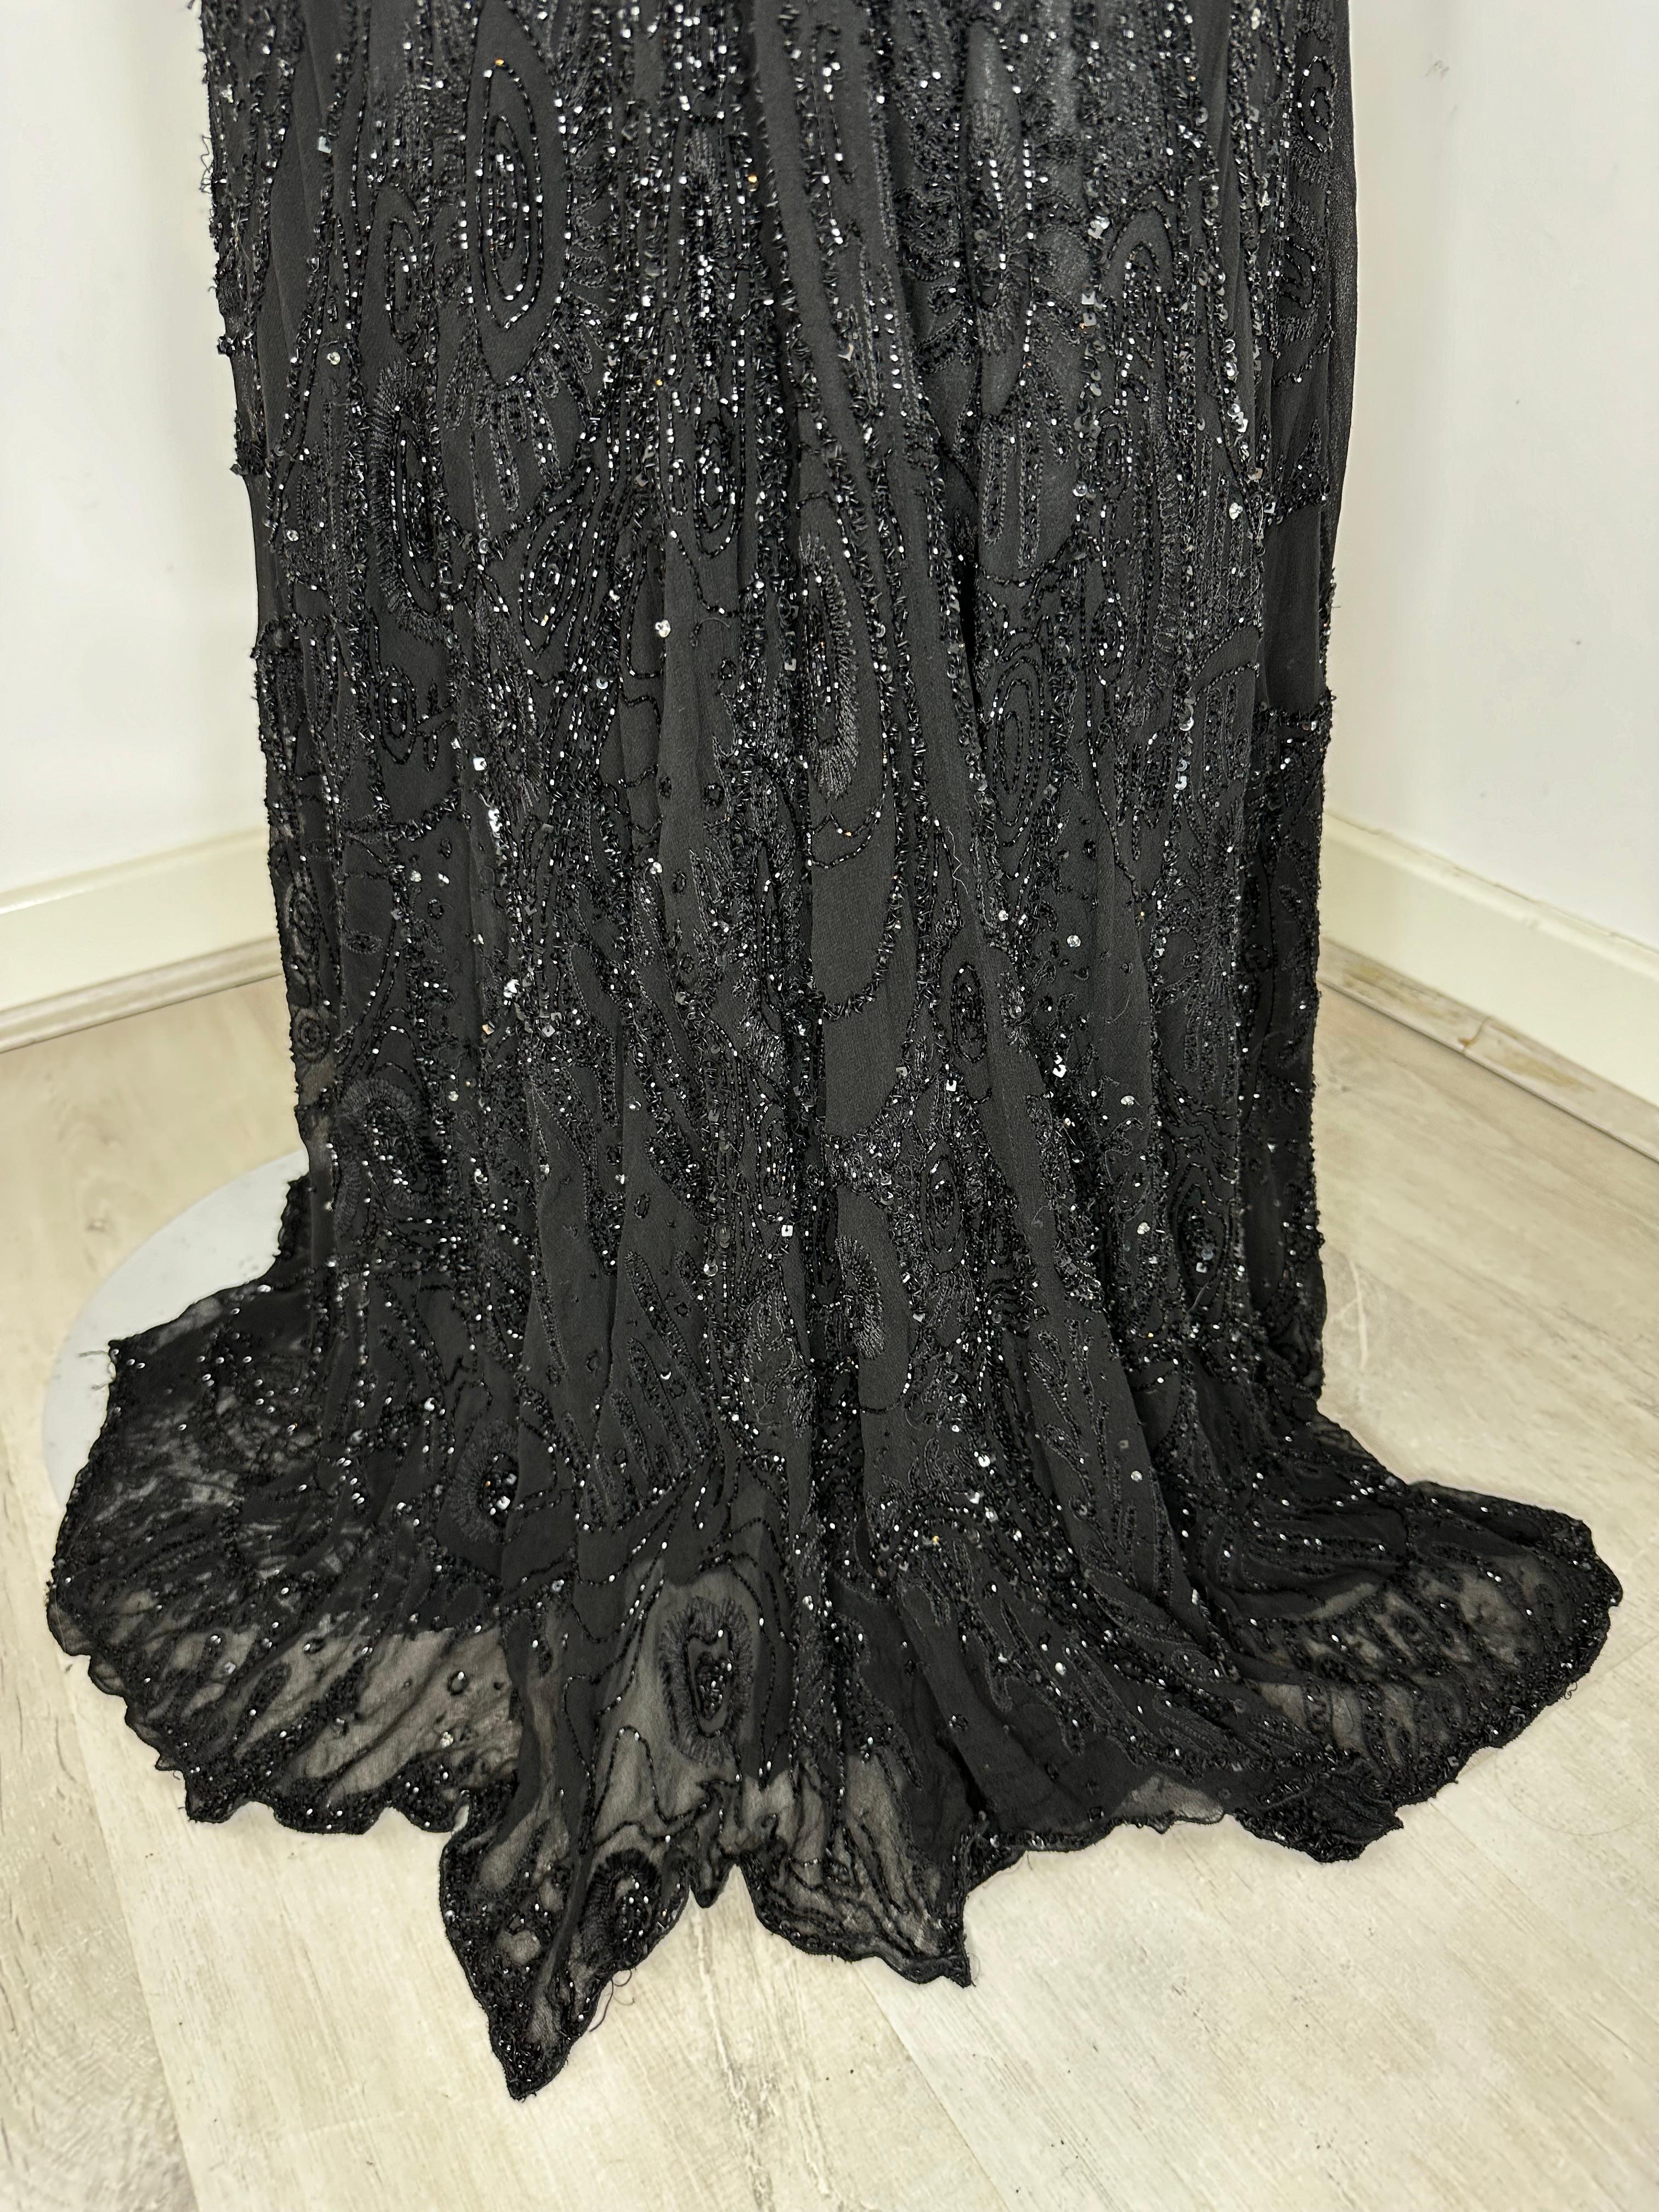 Roberto Cavalli 2003 black beaded maxi gown dress  In Good Condition For Sale In Annandale, VA